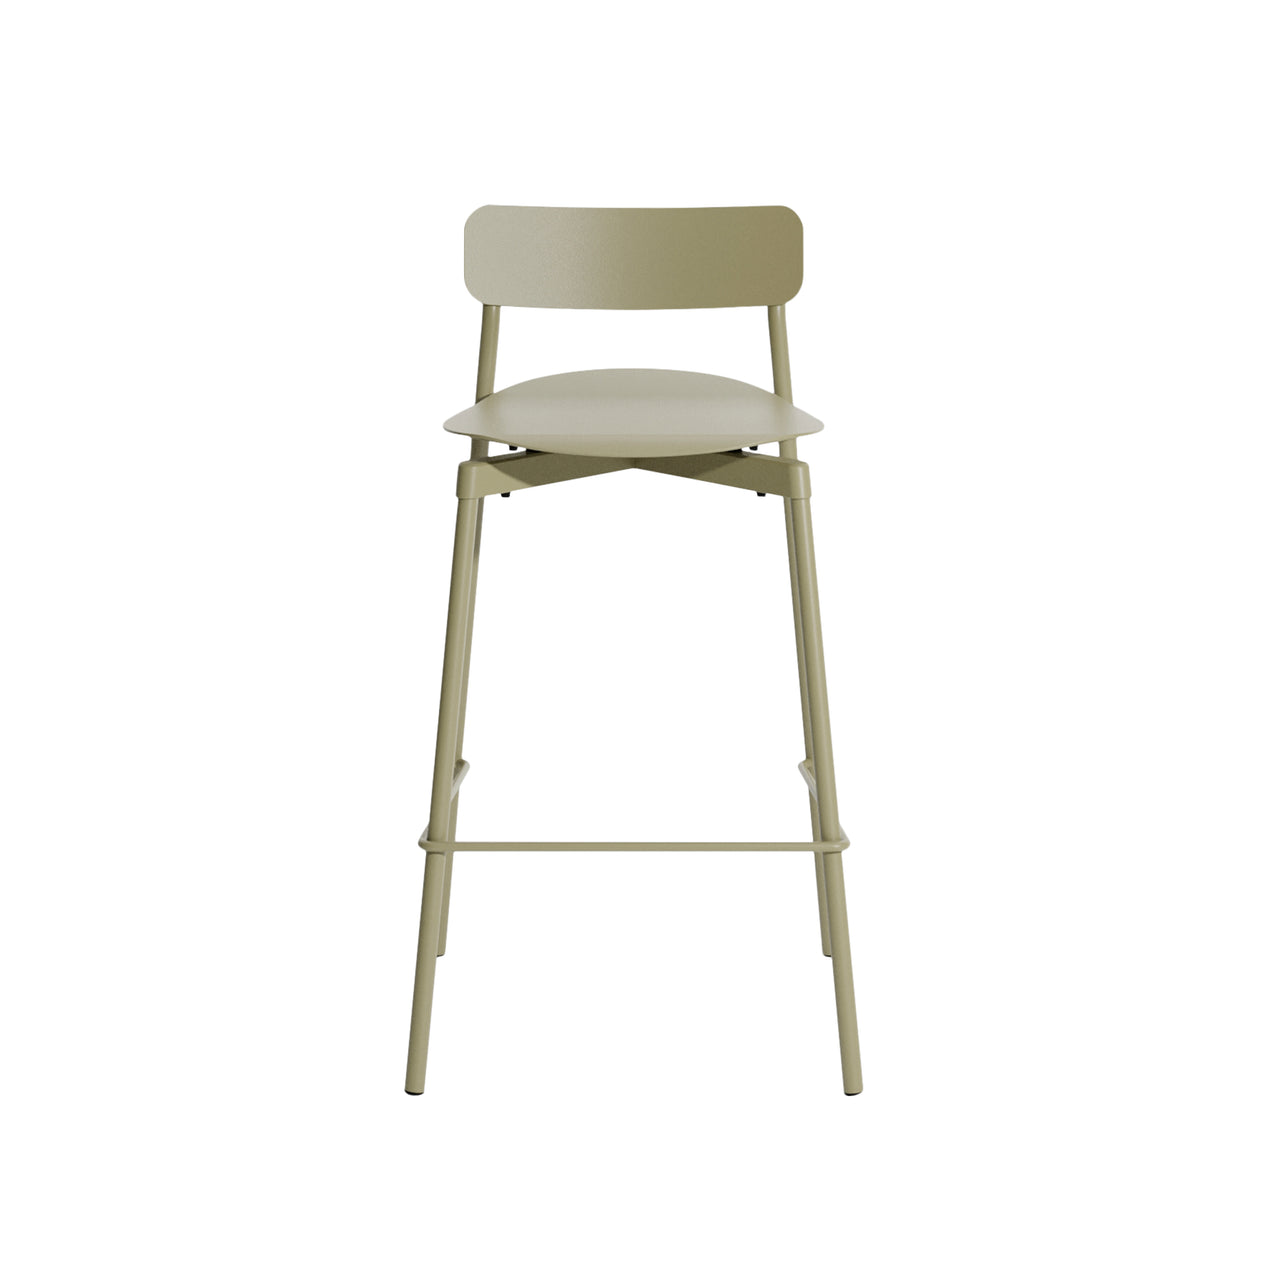 Fromme Stacking Bar + Counter Stool: Counter + Jade Green